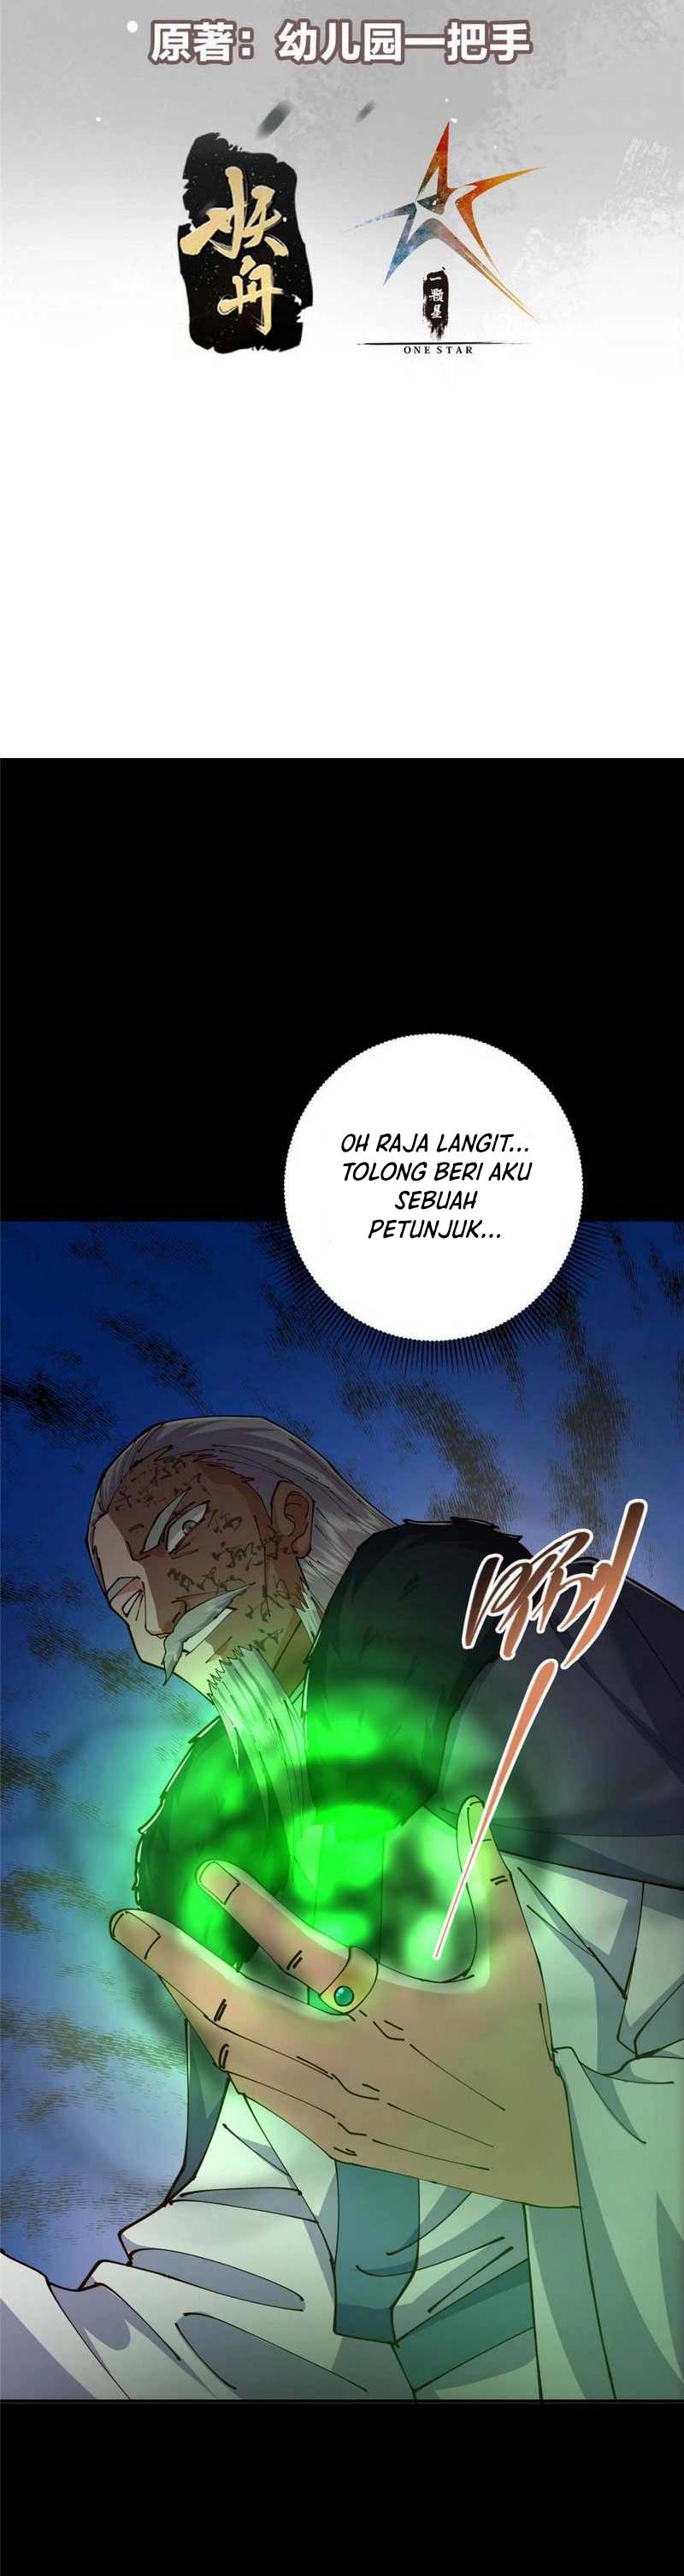 Keep A Low Profile, Sect Leader Chapter 237 Bahasa Indonesia